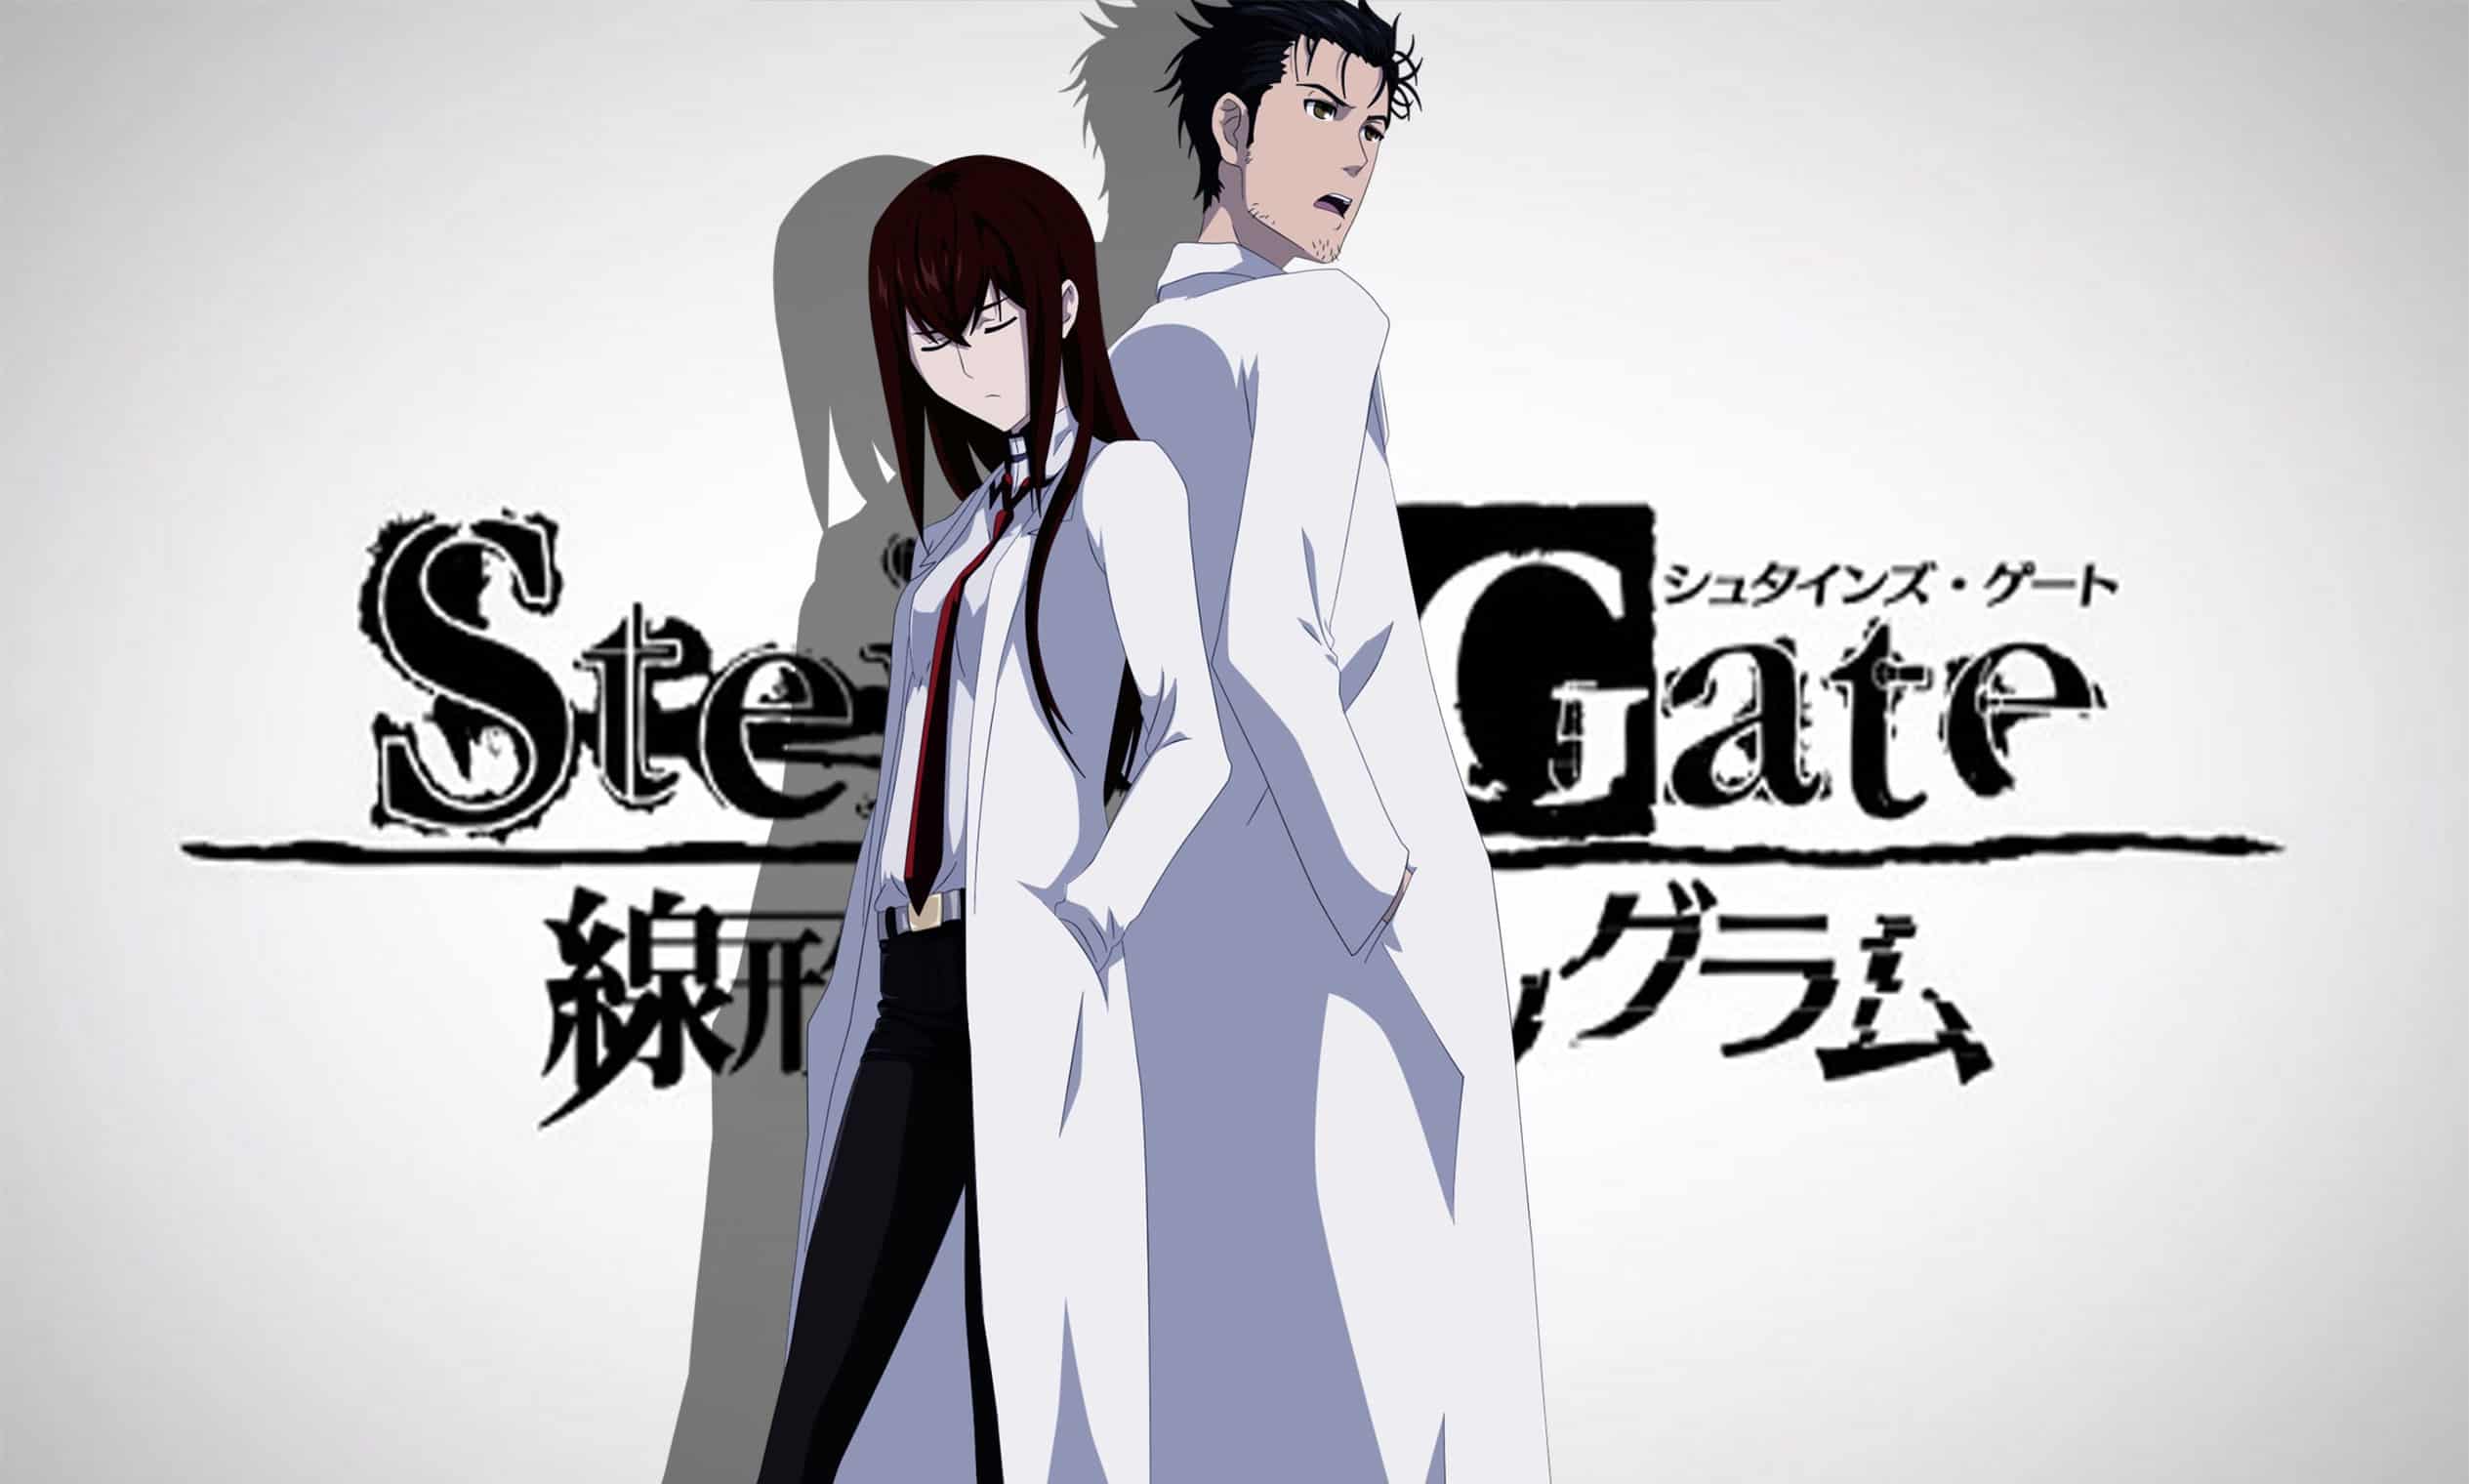 Steins;Gate timeline explained: the best anime about time travel